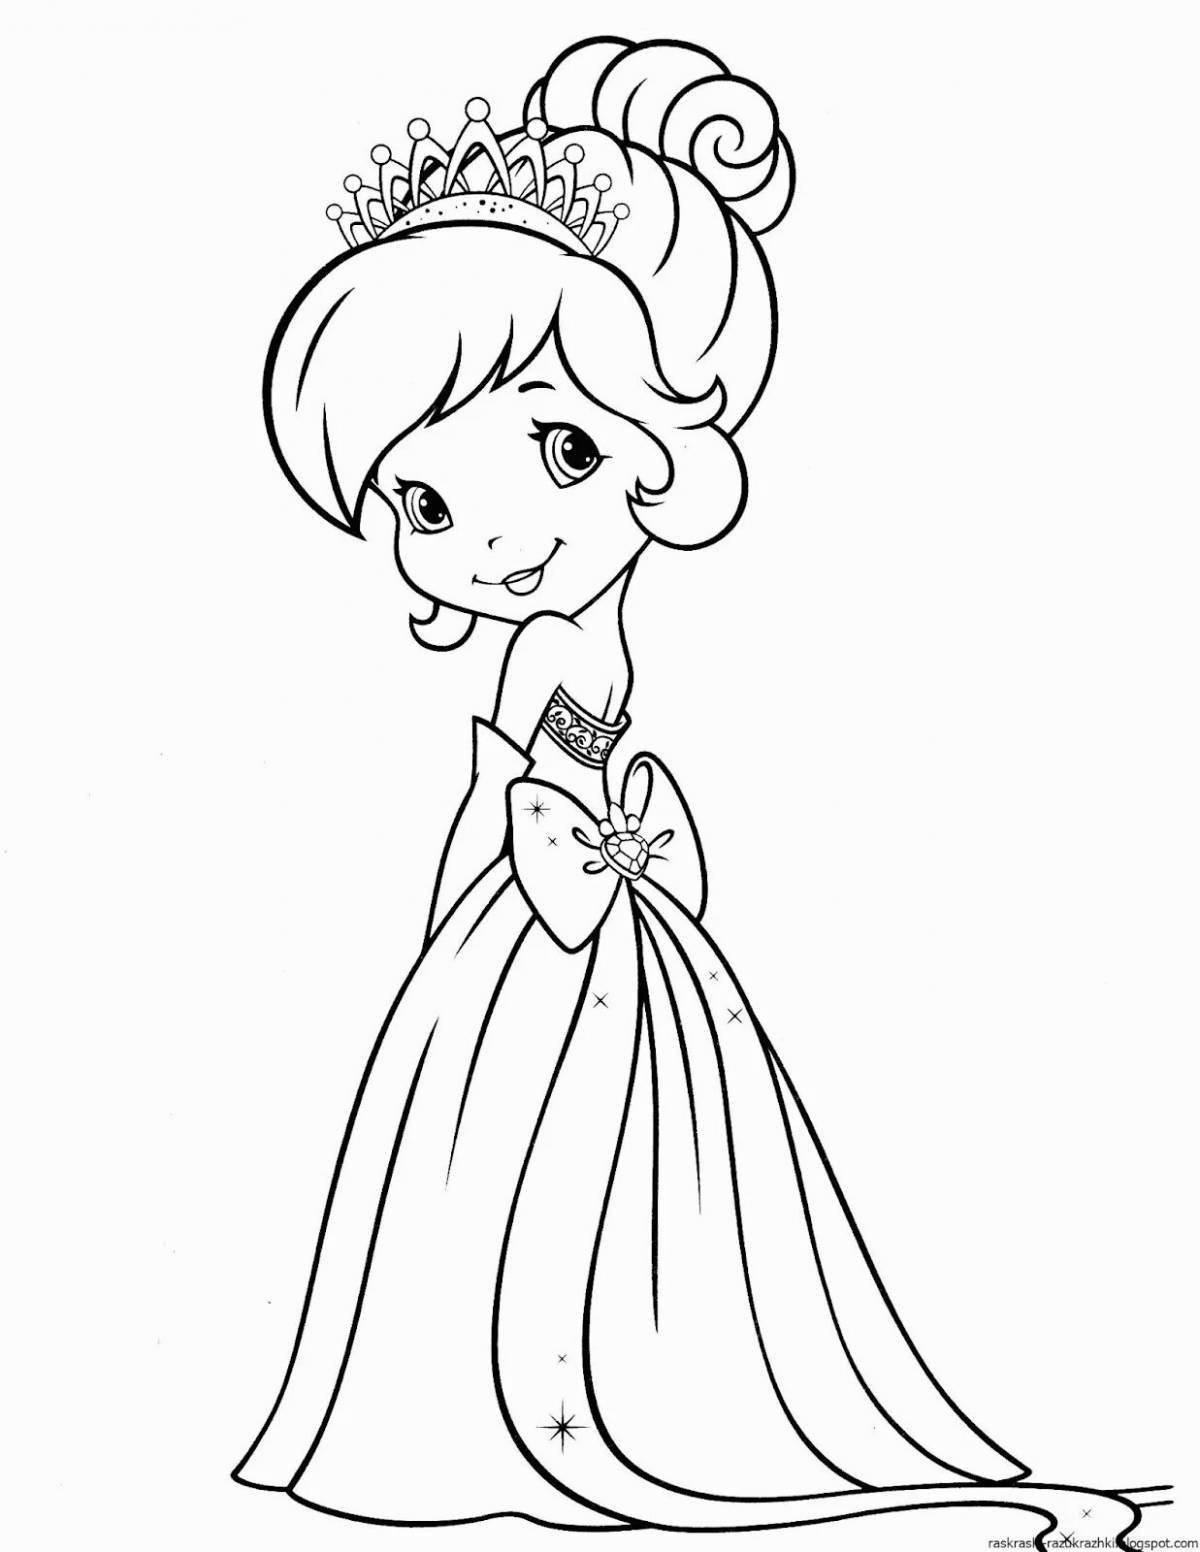 Charming princess coloring book 4-5 years old